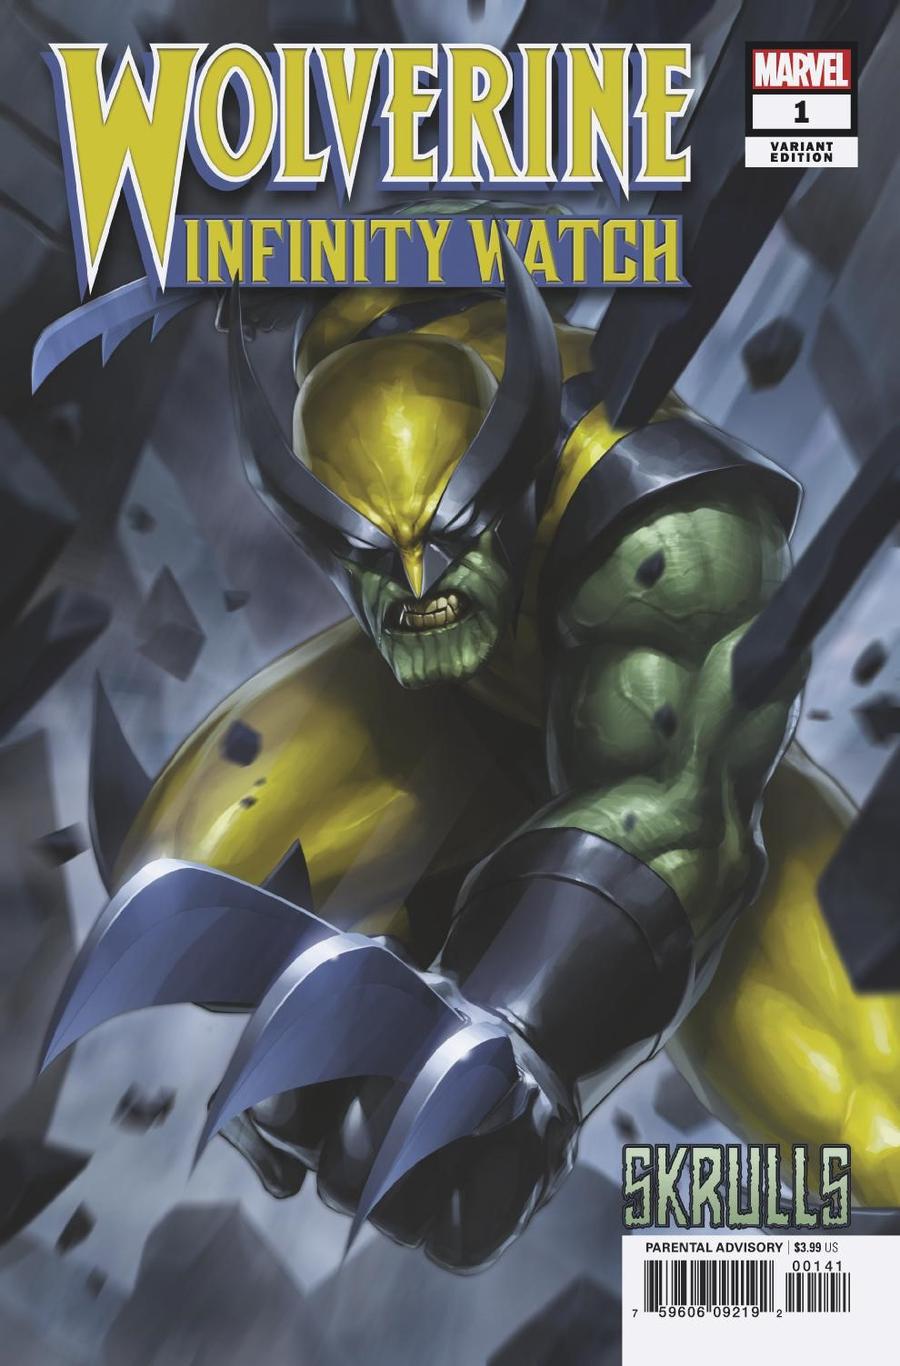 Wolverine Infinity Watch #1 Cover B Variant Jee Hyung Lee Skrulls Cover